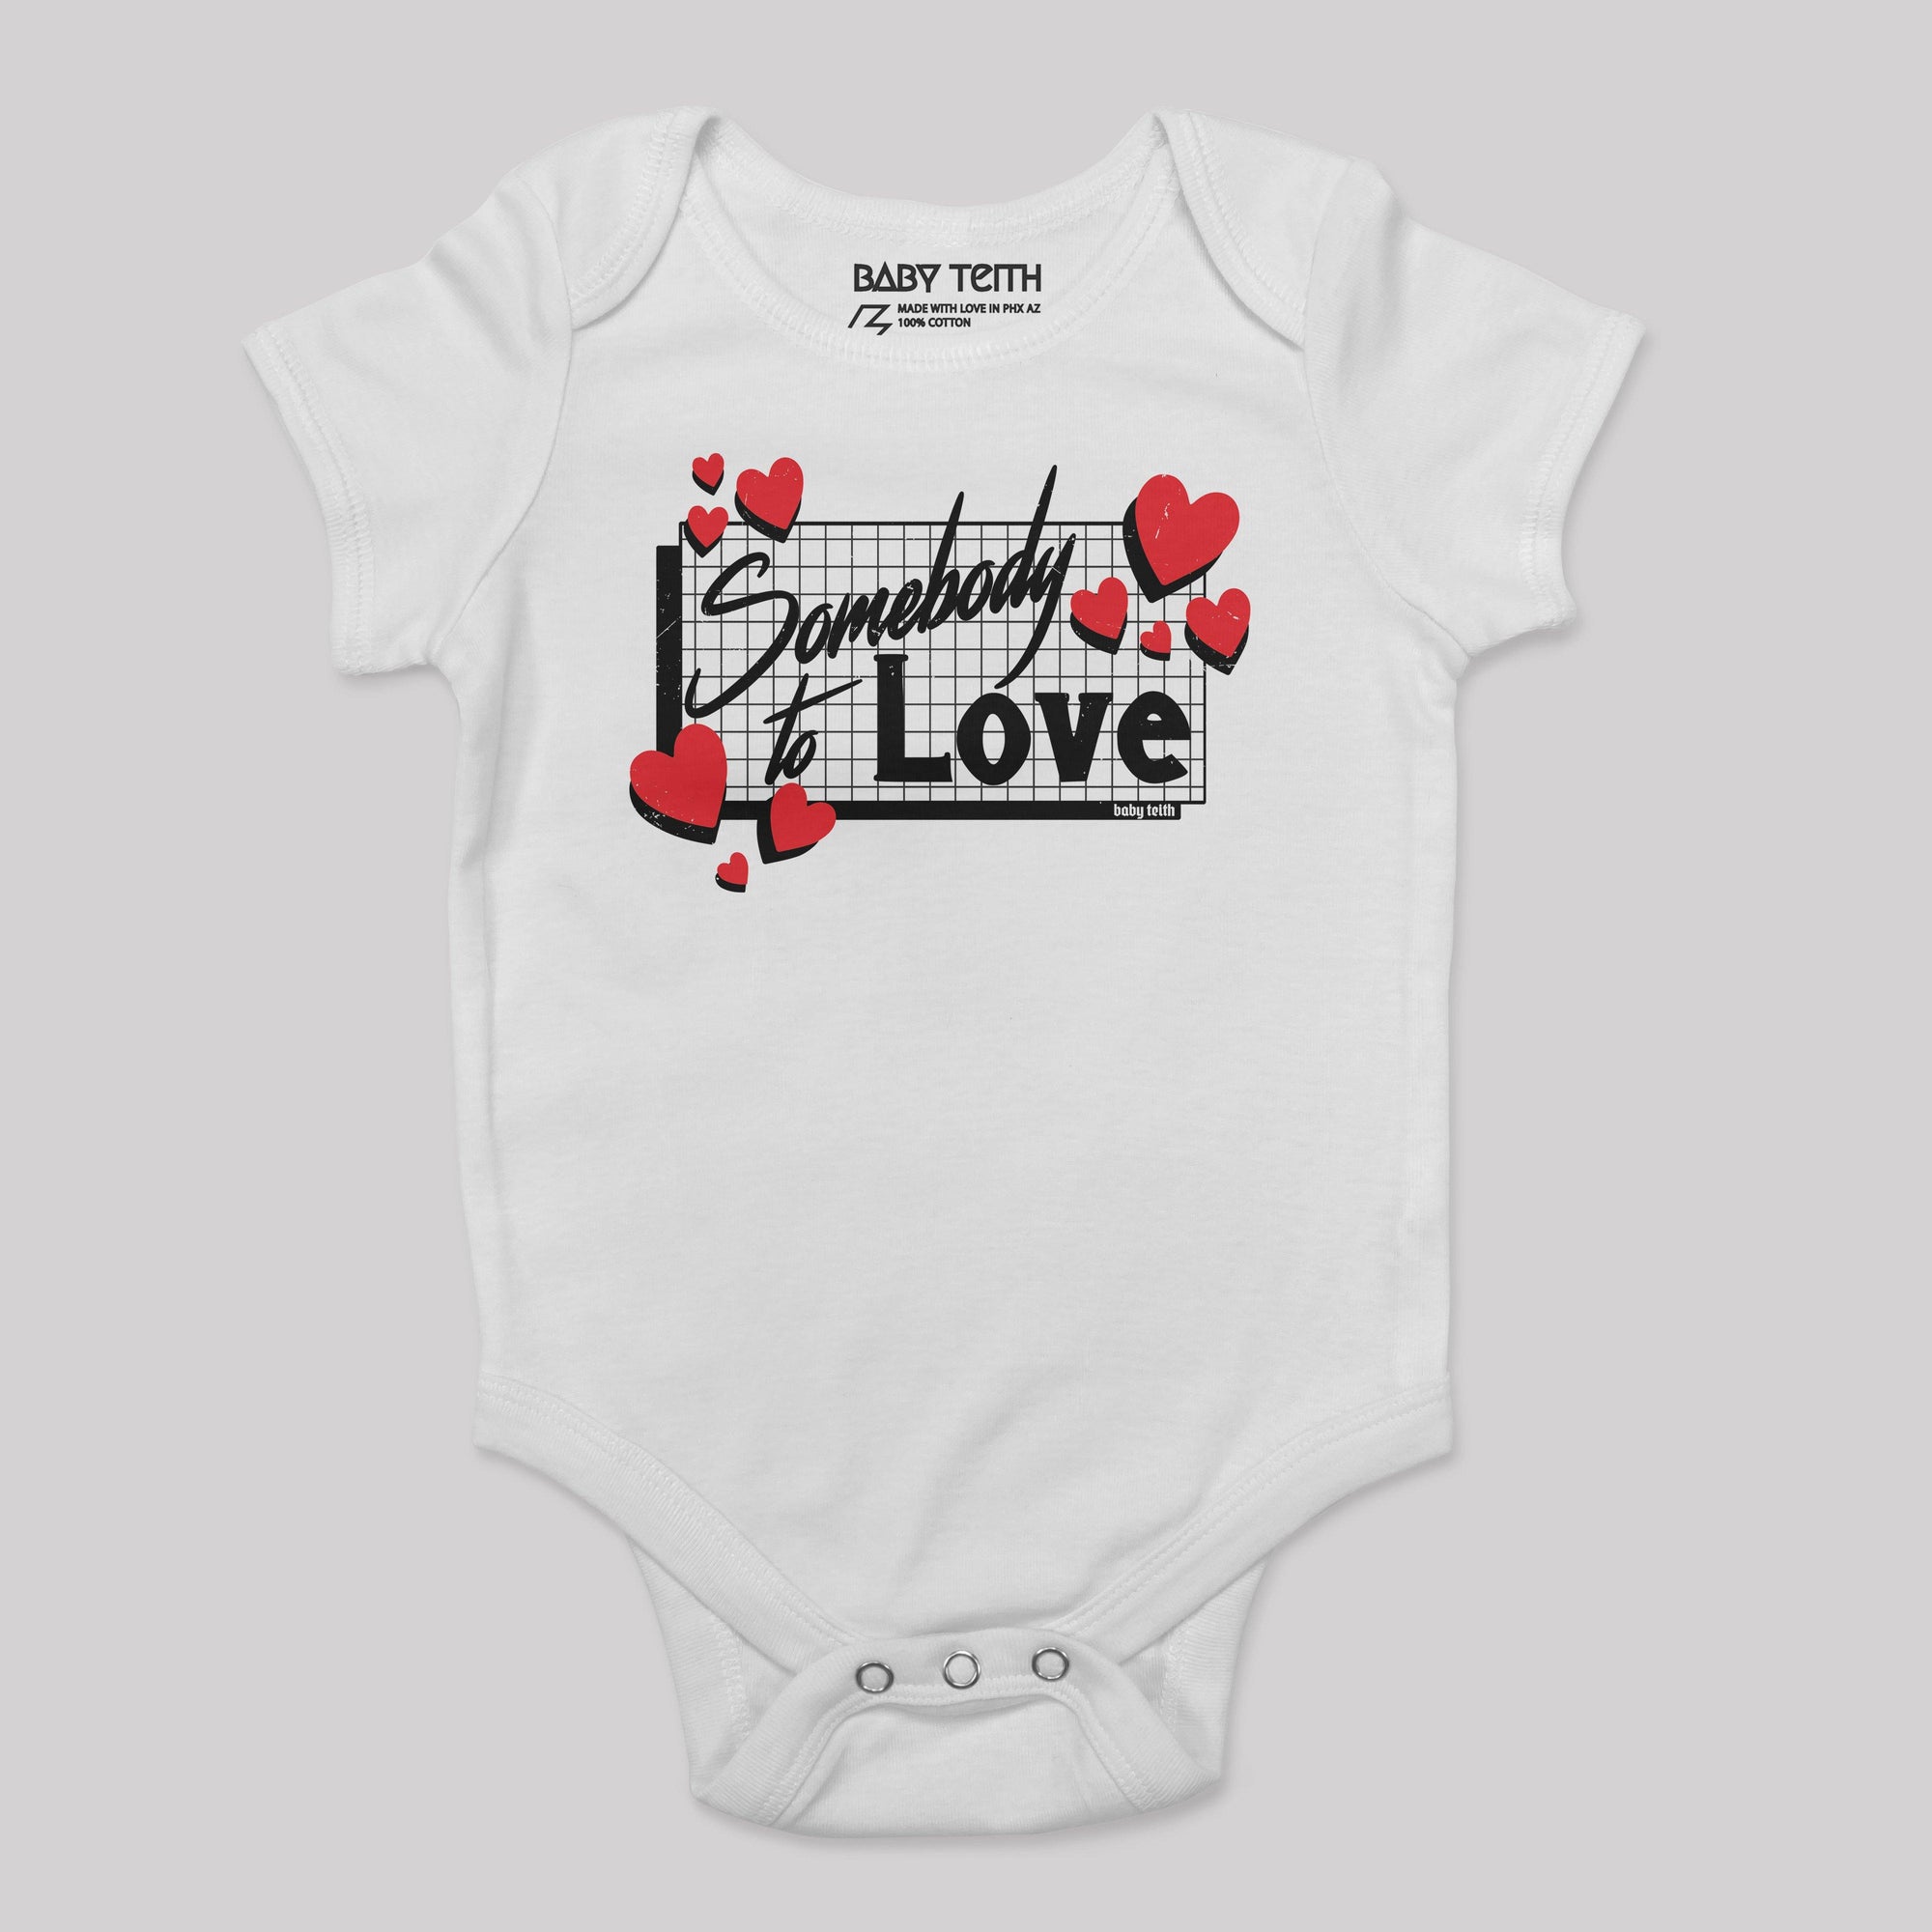 &quot;Somebody to Love&quot; 80&#39;s Bodysuit for Babies - Baby Teith